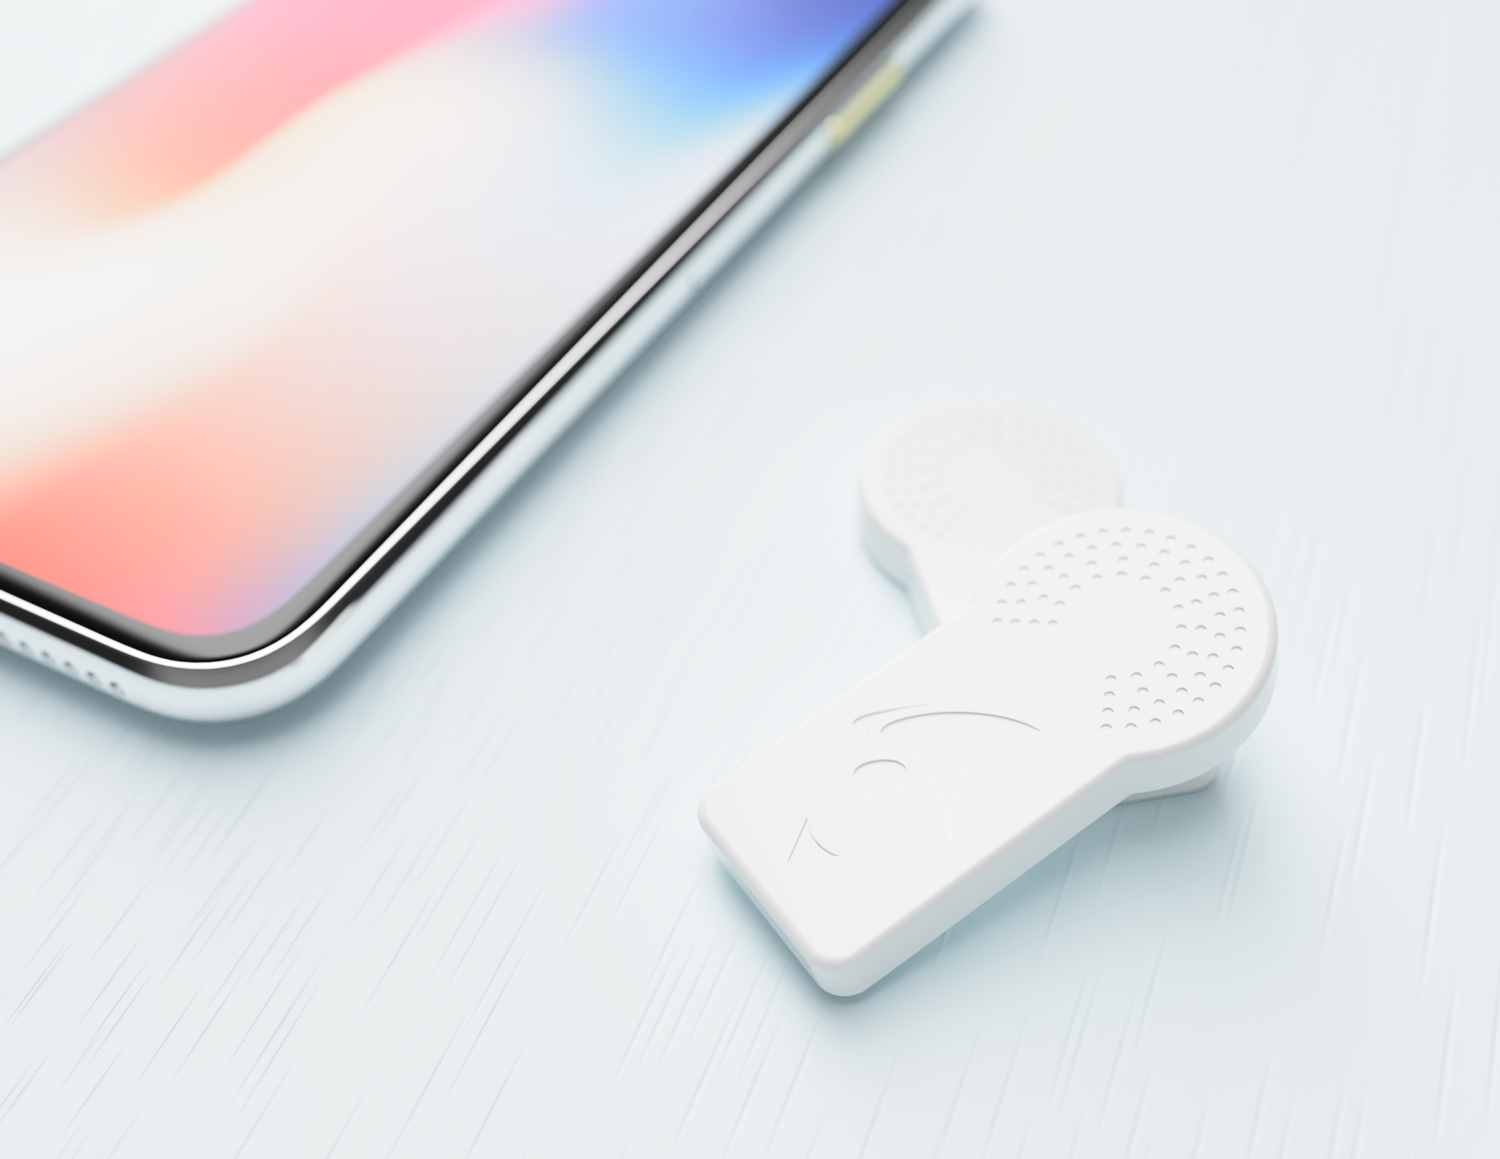 Two Fibion SENS Motion Wearable Sensors on a Table next to iPhone X